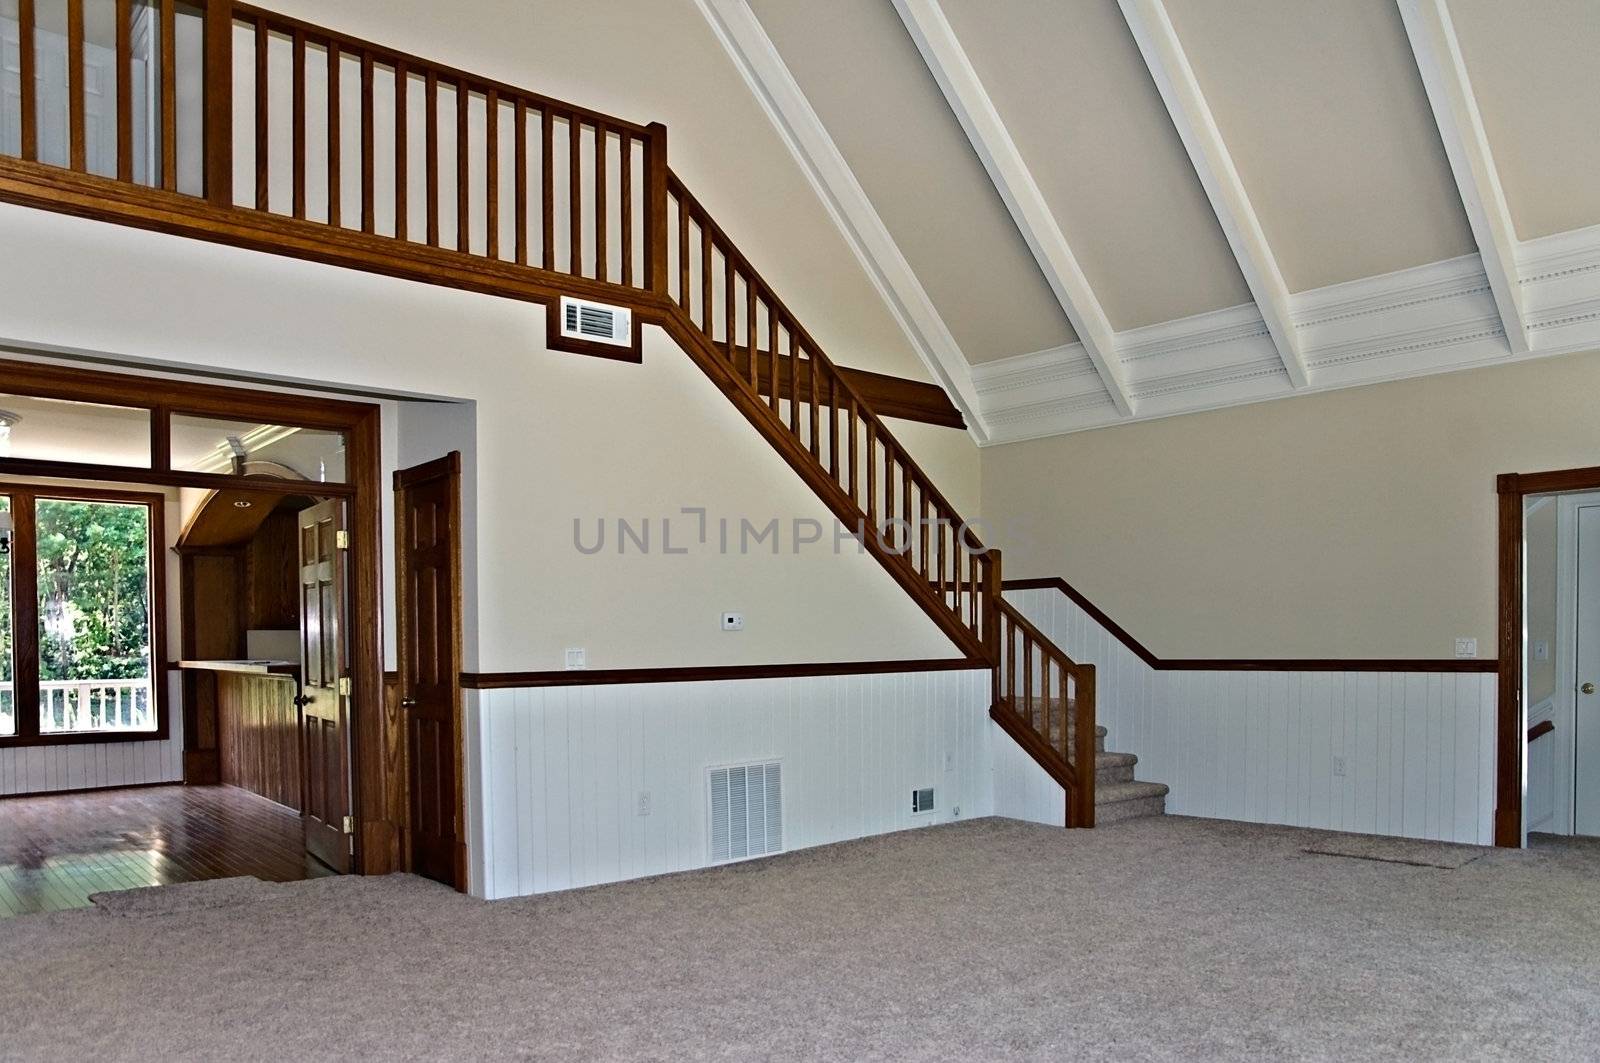 The interior of a newly remodeled house showing the stairway, carpet, ceiling detail and entry to the kitchen area.